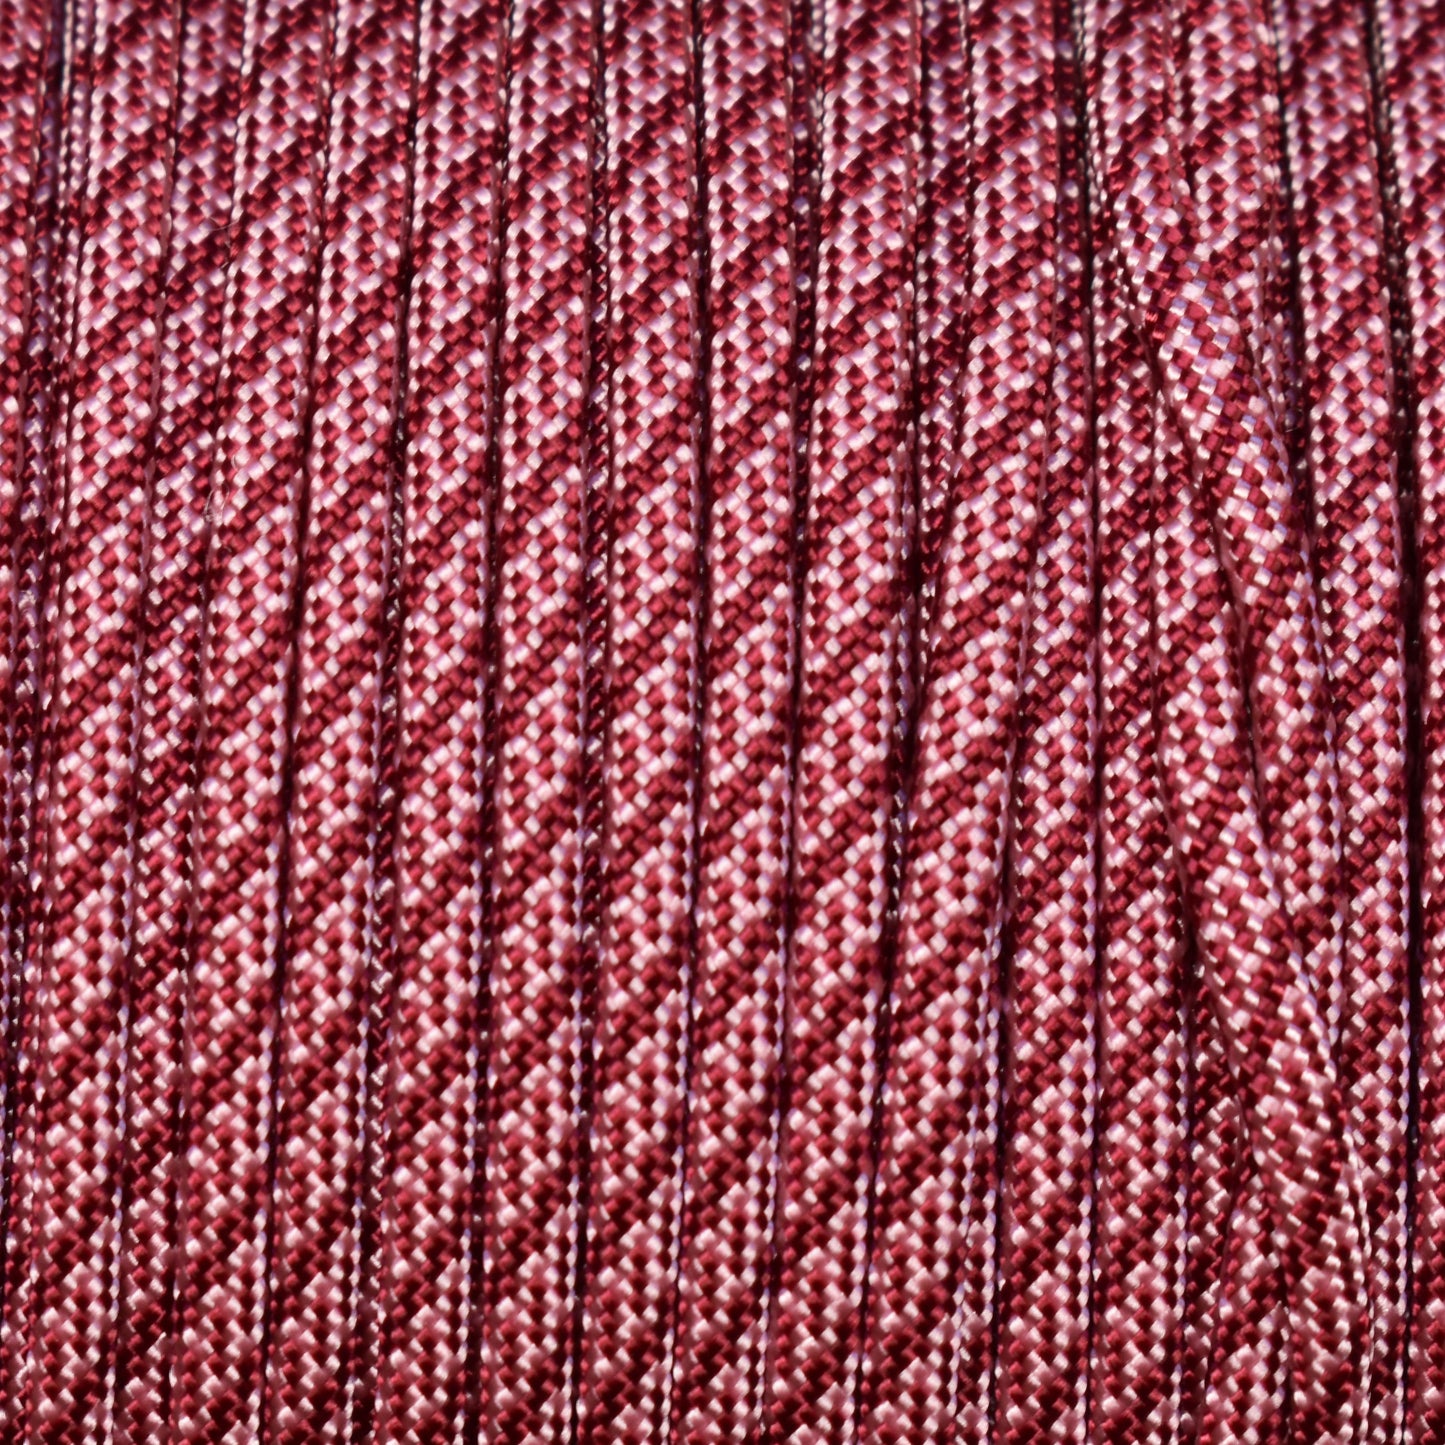 550 Paracord Rose Pink with Burgundy Helix Made in the USA Nylon/Nylon (1000 FT.)